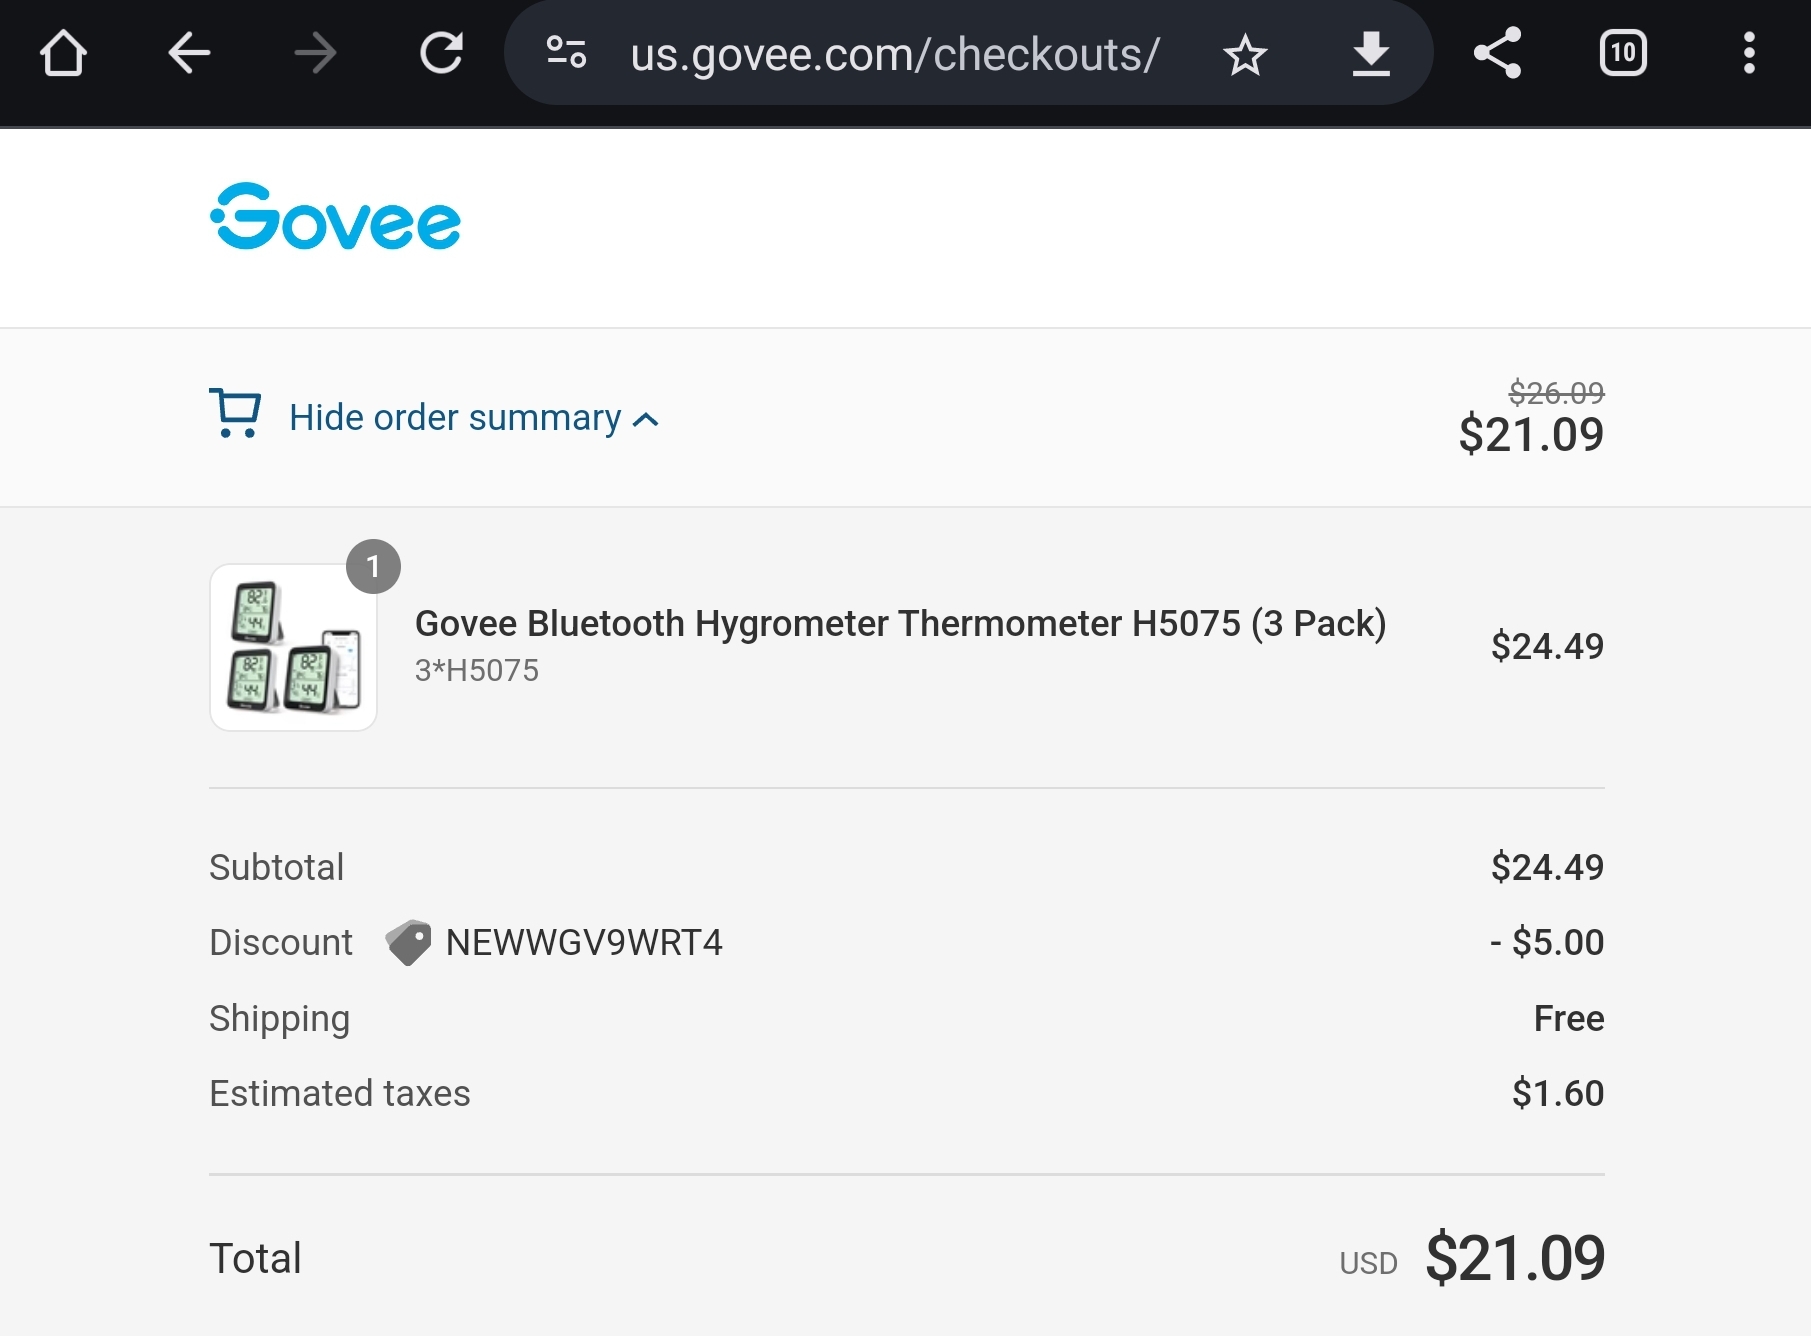 Govee Bluetooth Hygrometer Thermometer H5075 (3 Pack) $19.49 w/ FS - YMMV $19.49